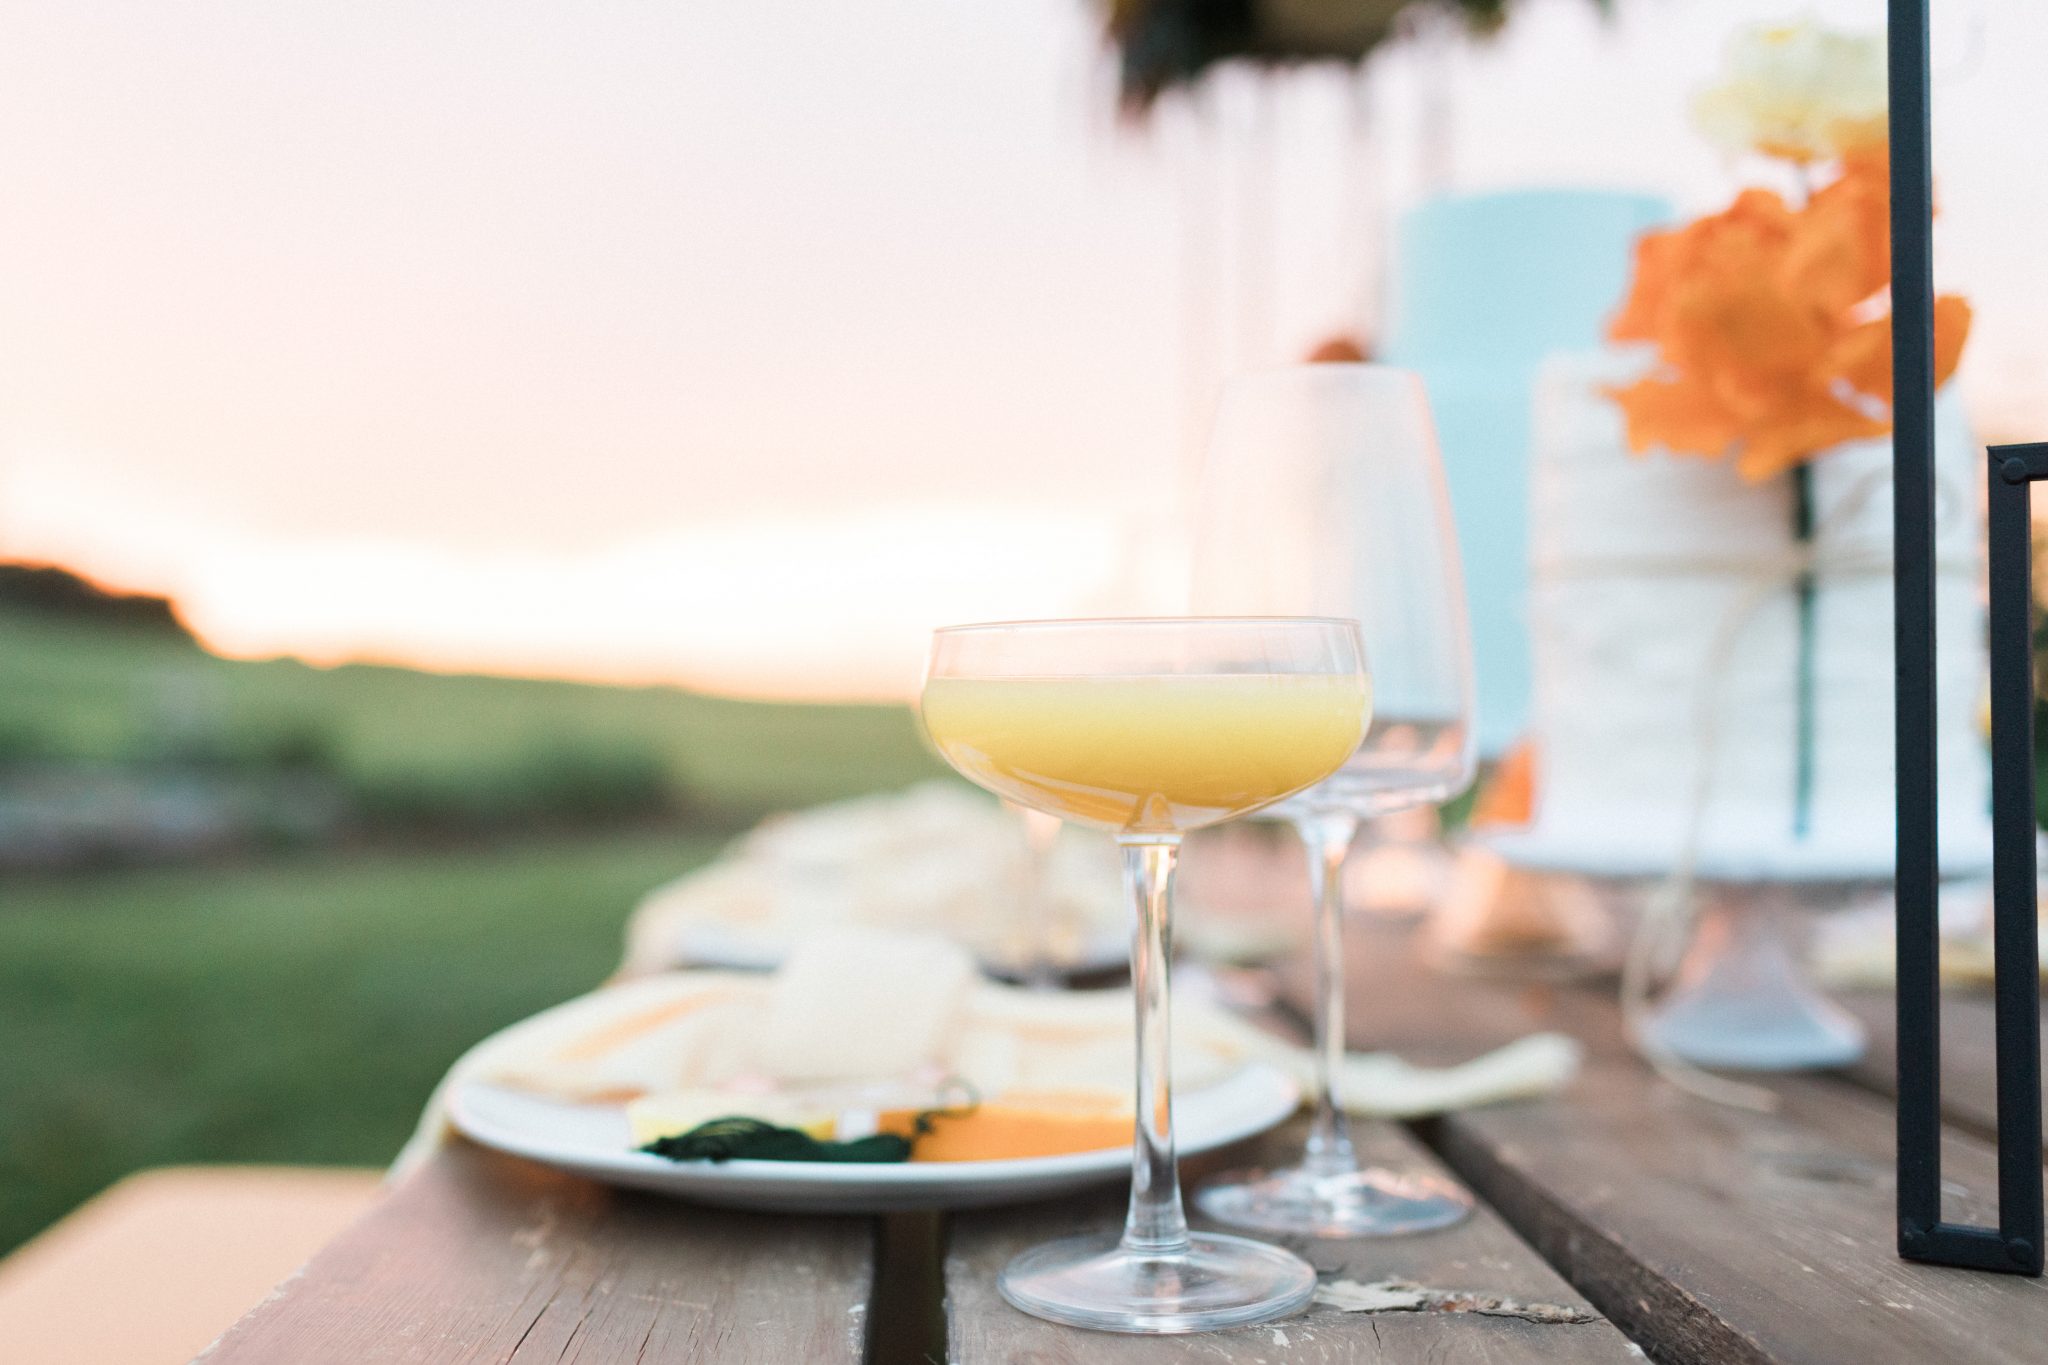 Tablescape featuring farmyard accents at sunset